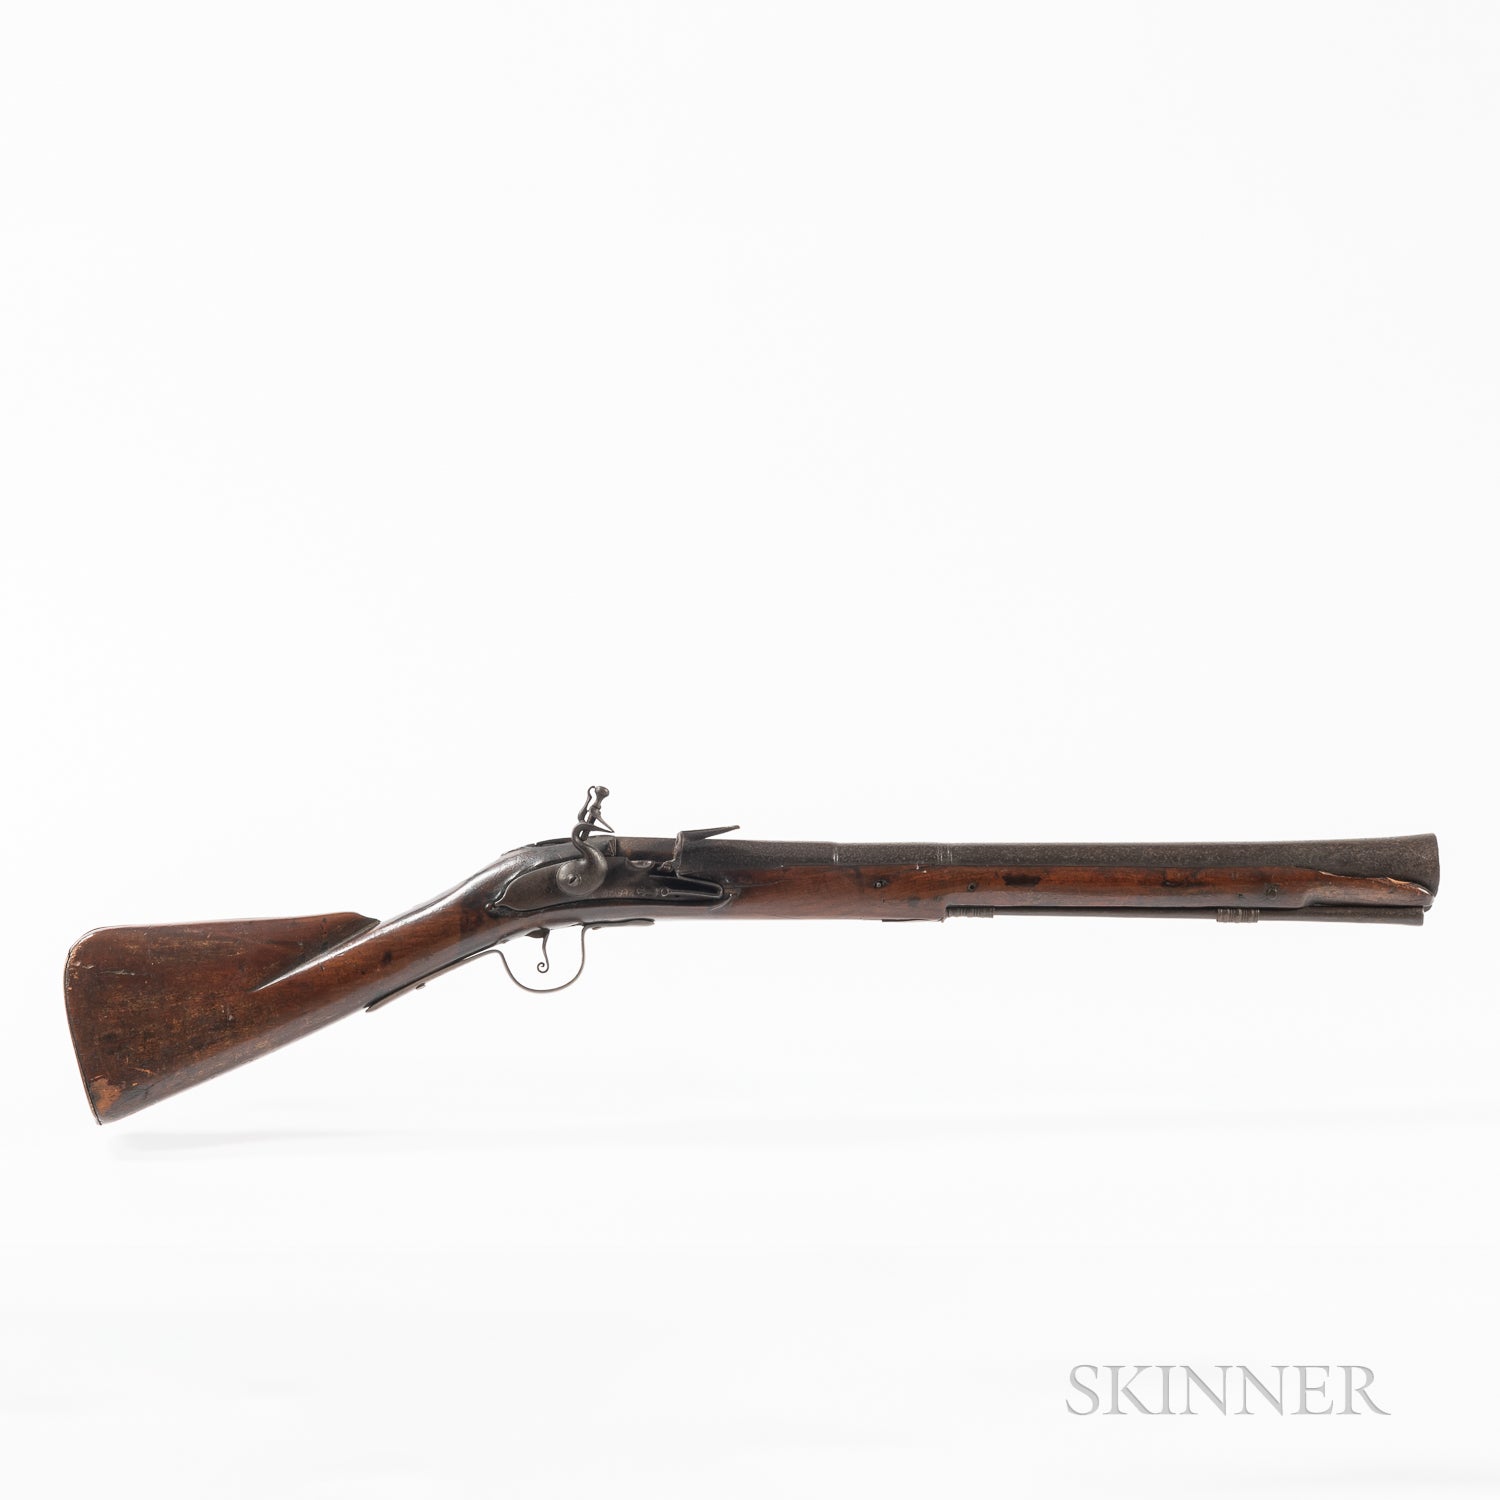 Skinner Historic Arms & Militaria Auction